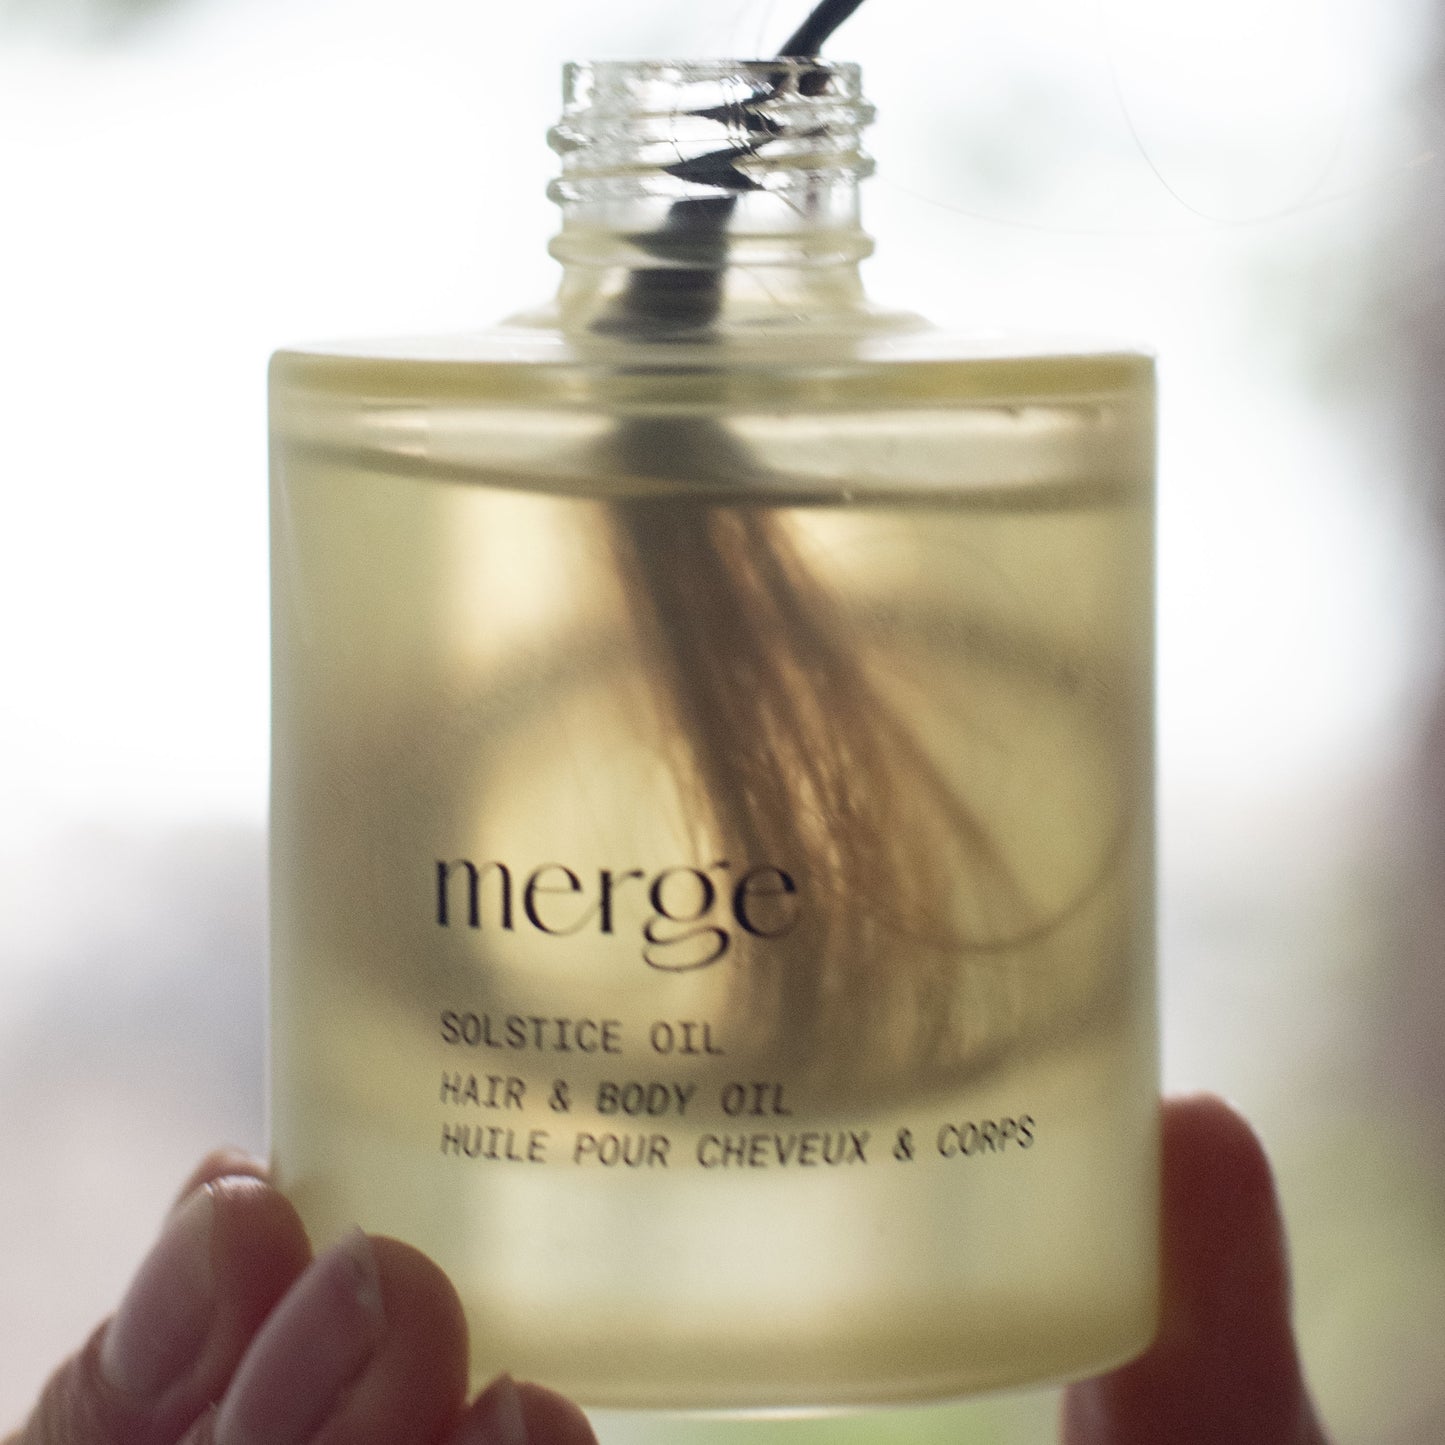 Solstice Hair and Body Oil by Merge